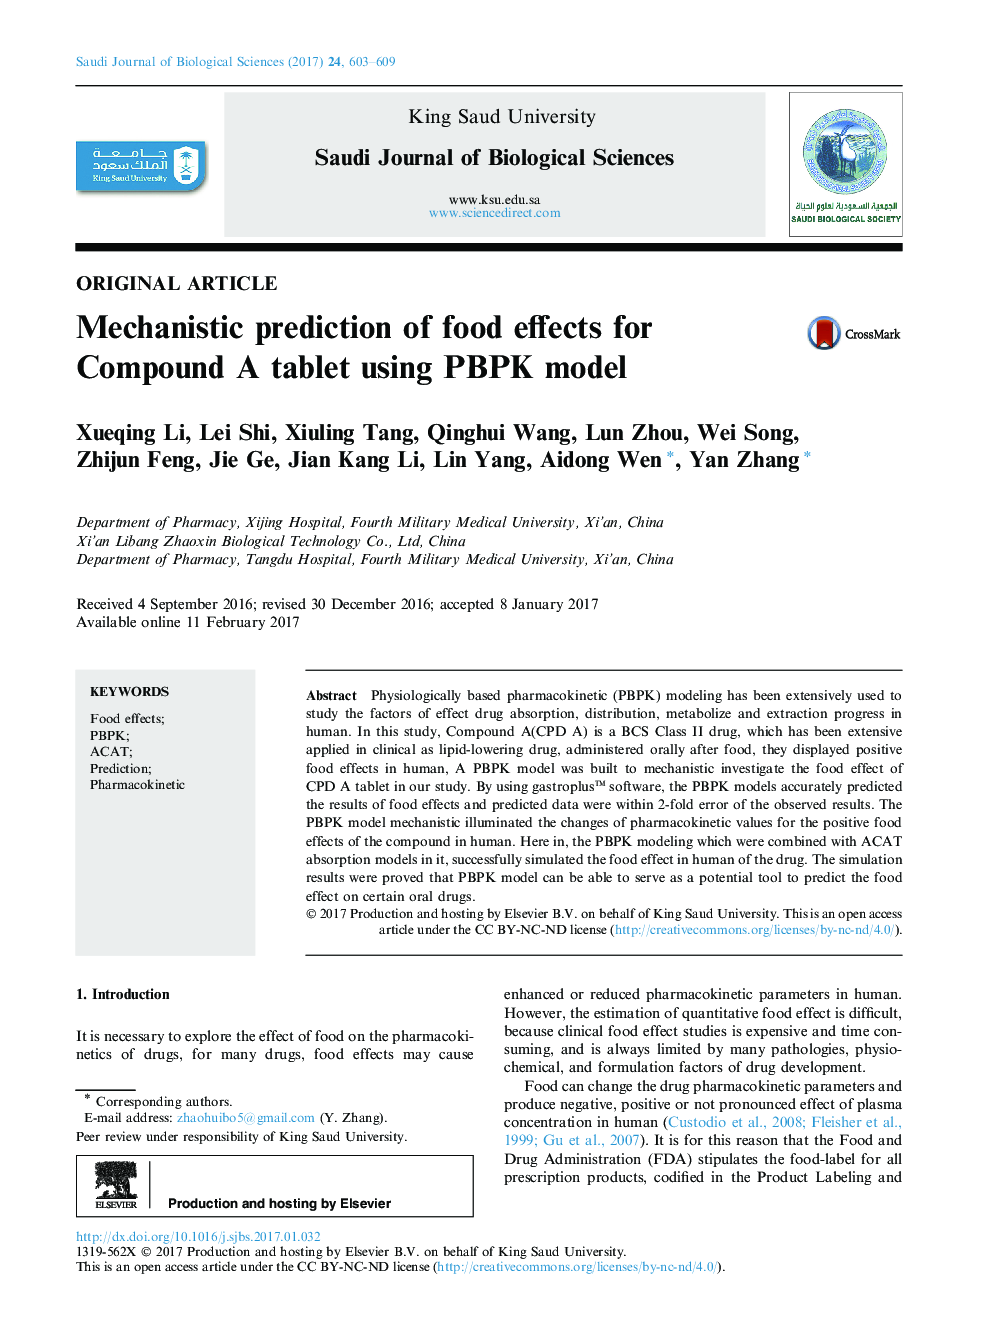 Mechanistic prediction of food effects for Compound A tablet using PBPK model